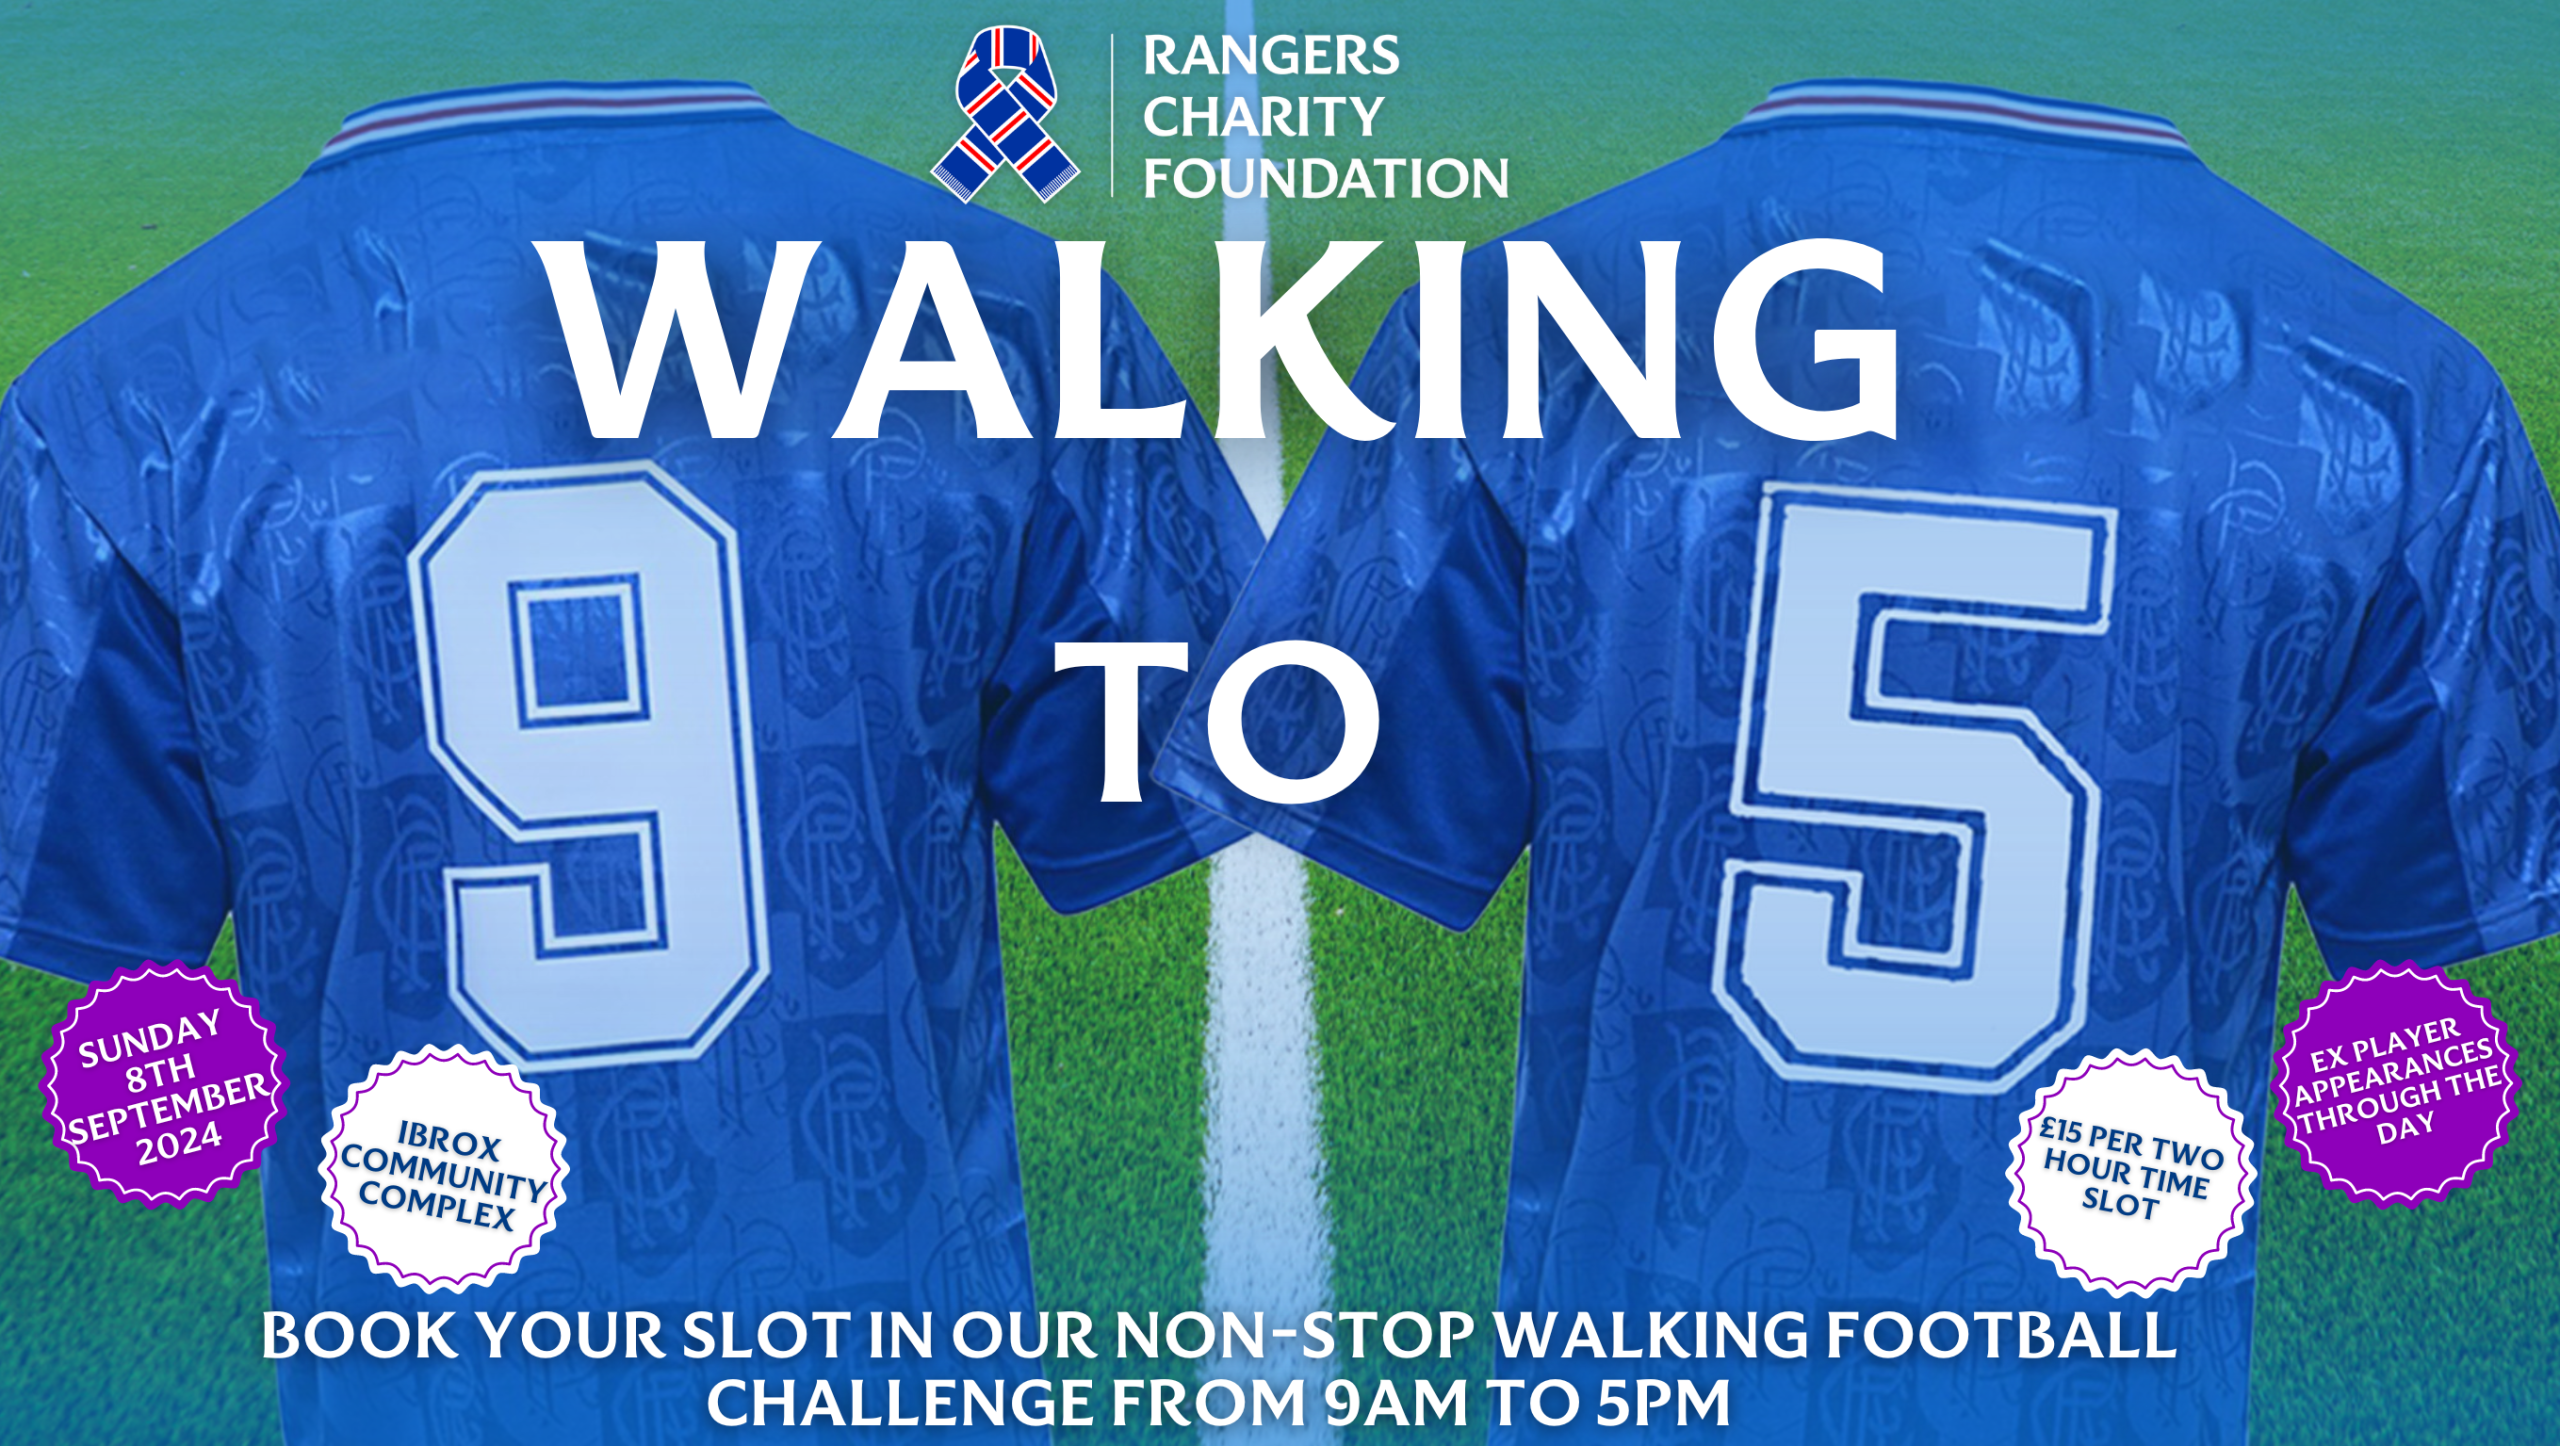 Walking 9-5 – Our Brand New Football Challenge!